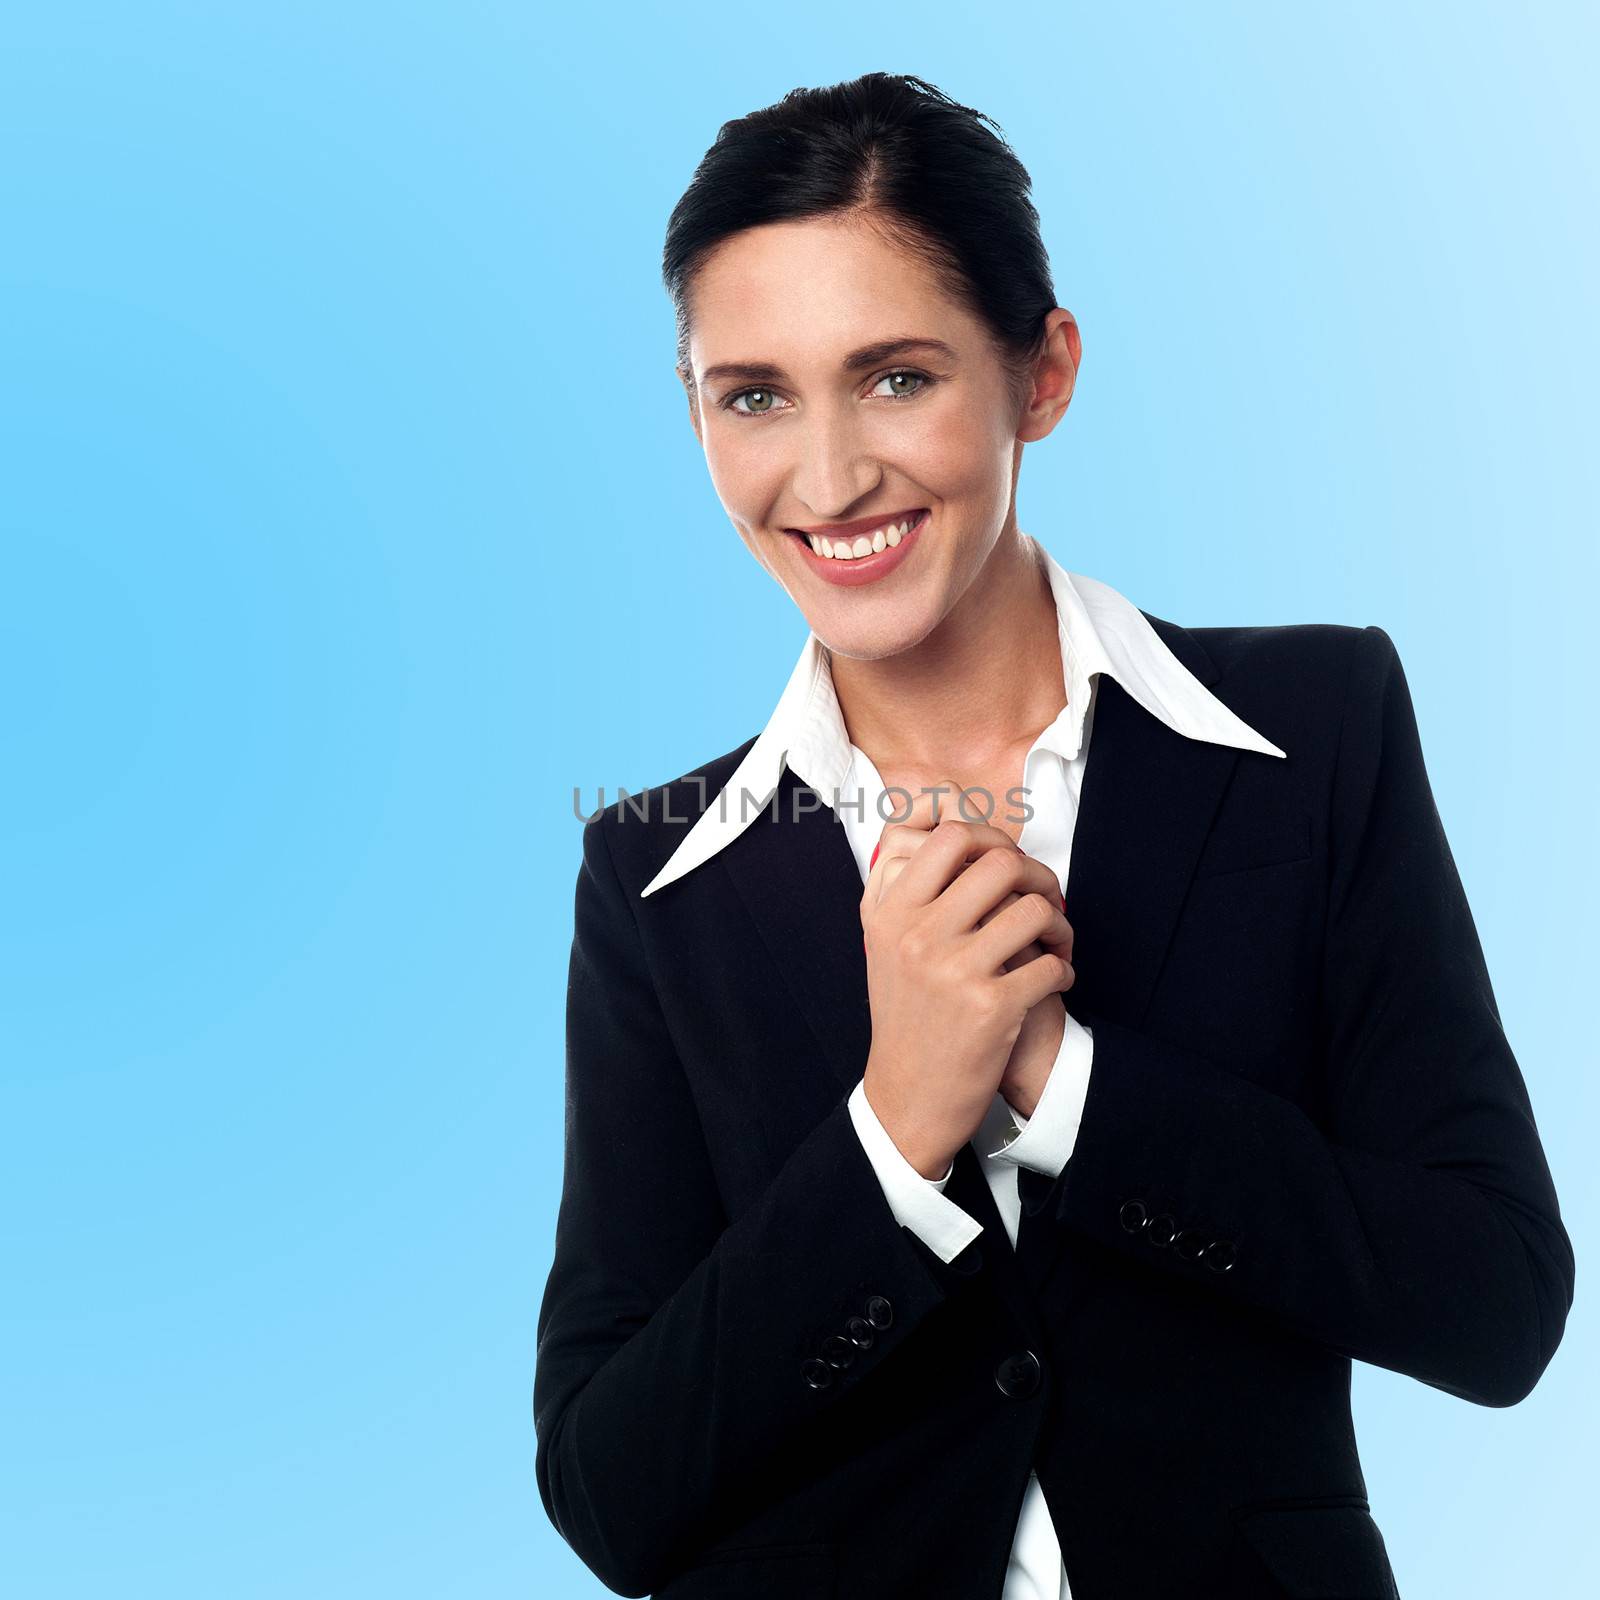 Smiling young successful businesswoman by stockyimages